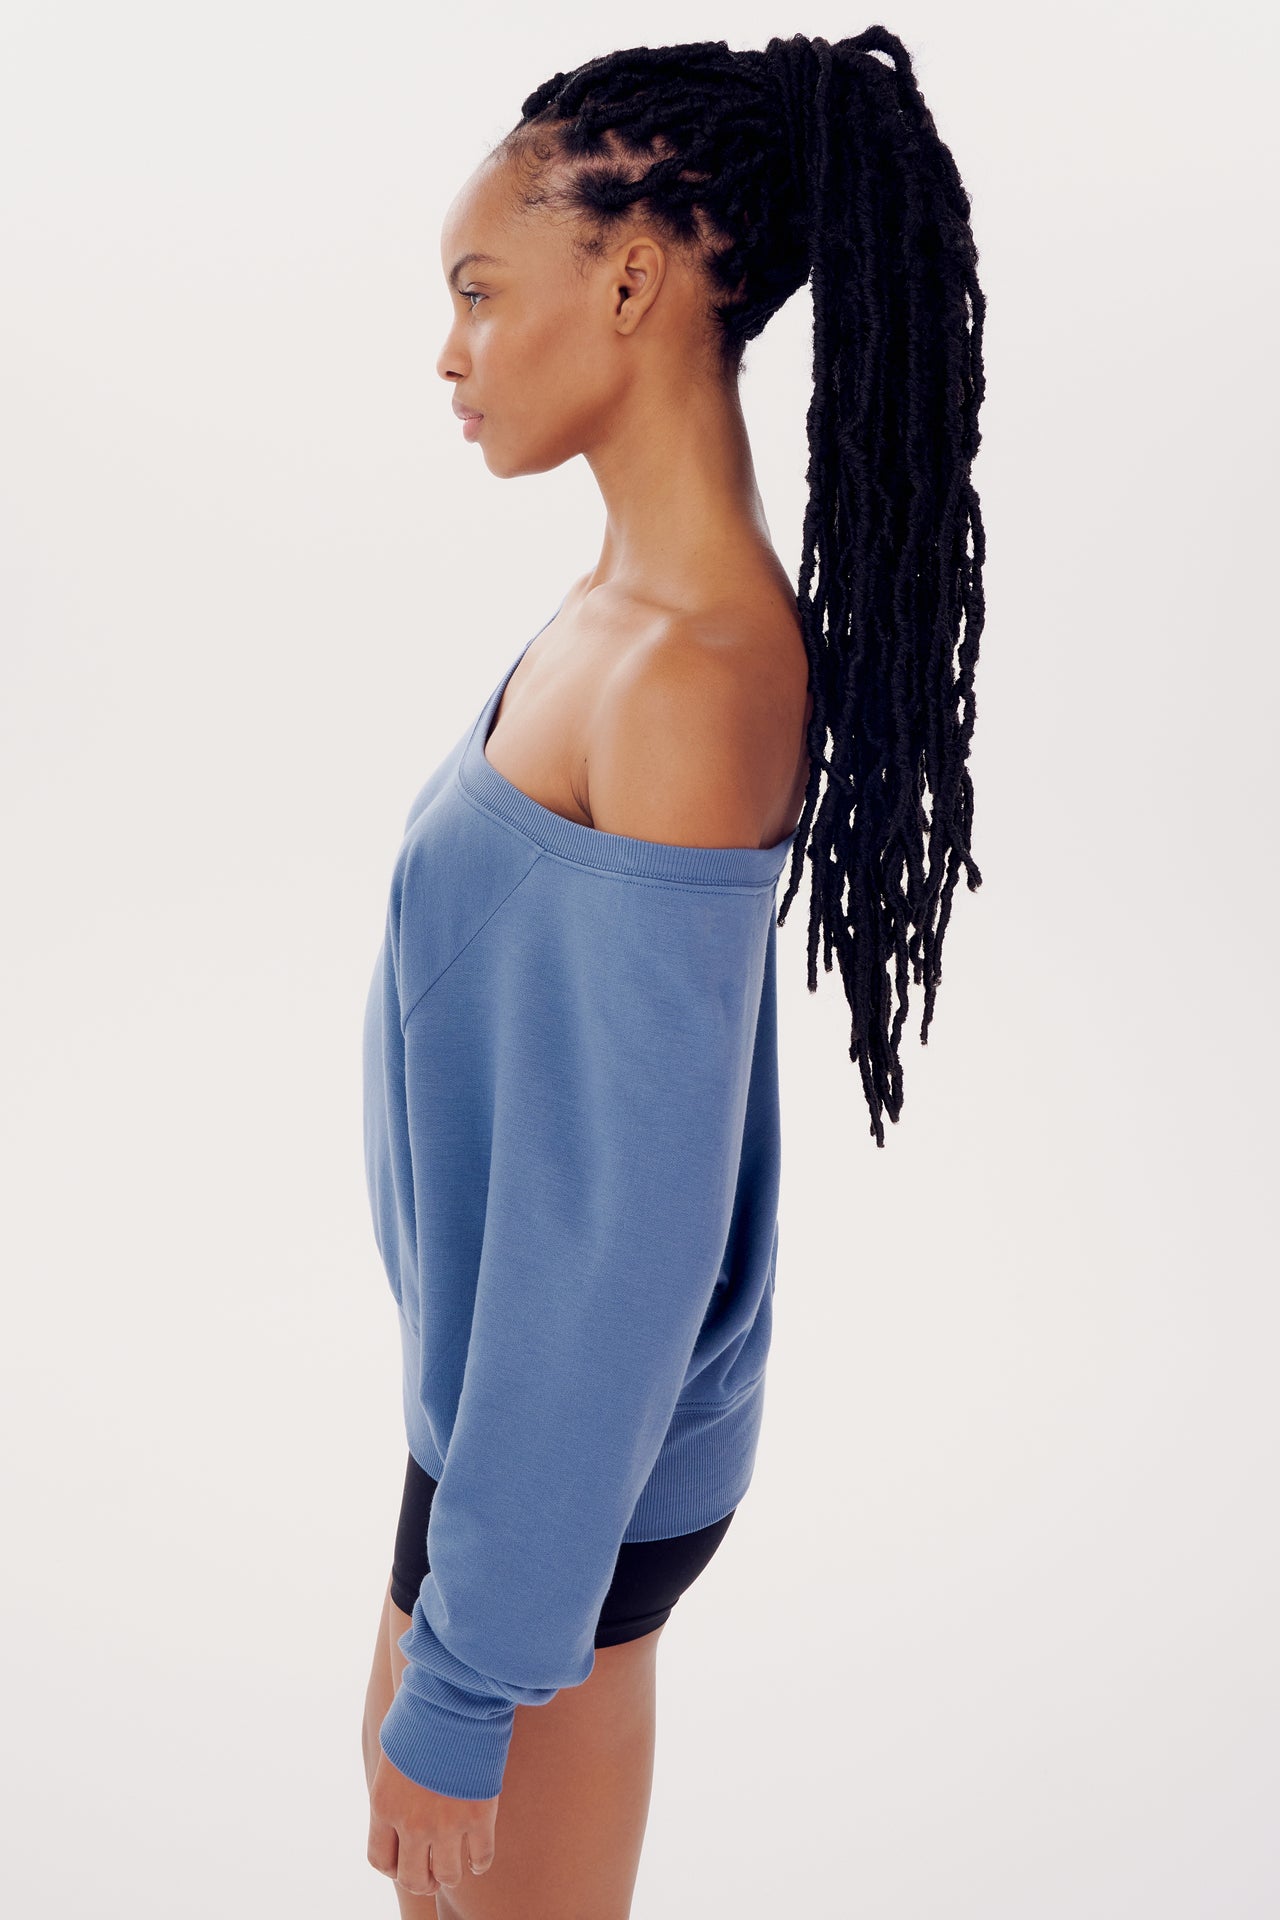 A woman with long braided hair wearing a blue SPLITS59 Indy Dolman Fleece Sweatshirt in a profile view against a white background.